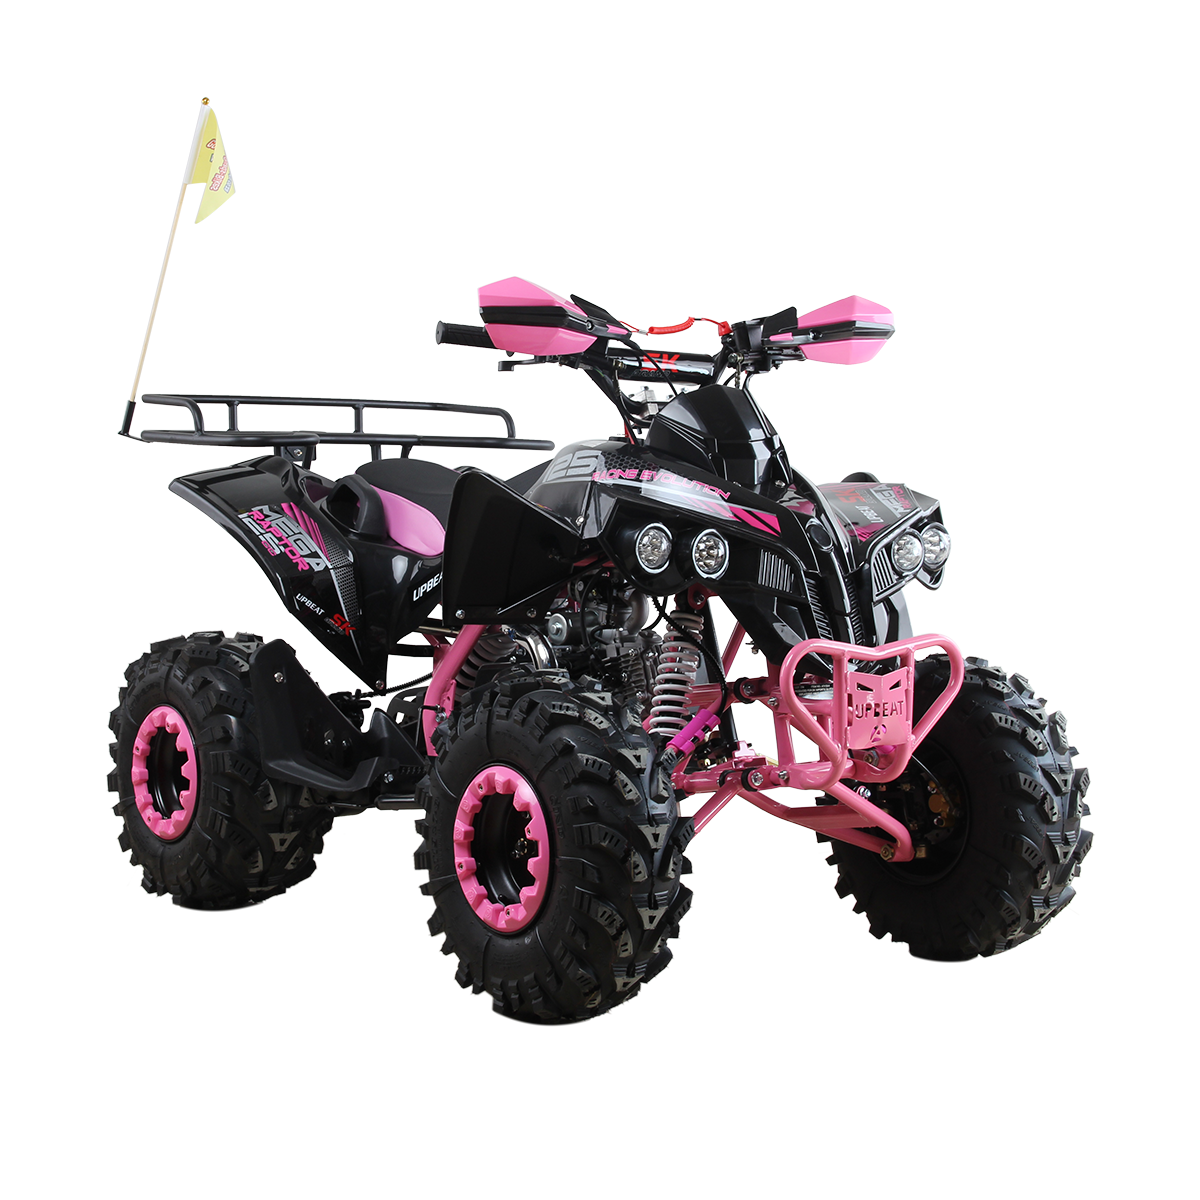 125cc Limited Edition Pink Panther Quad Bike